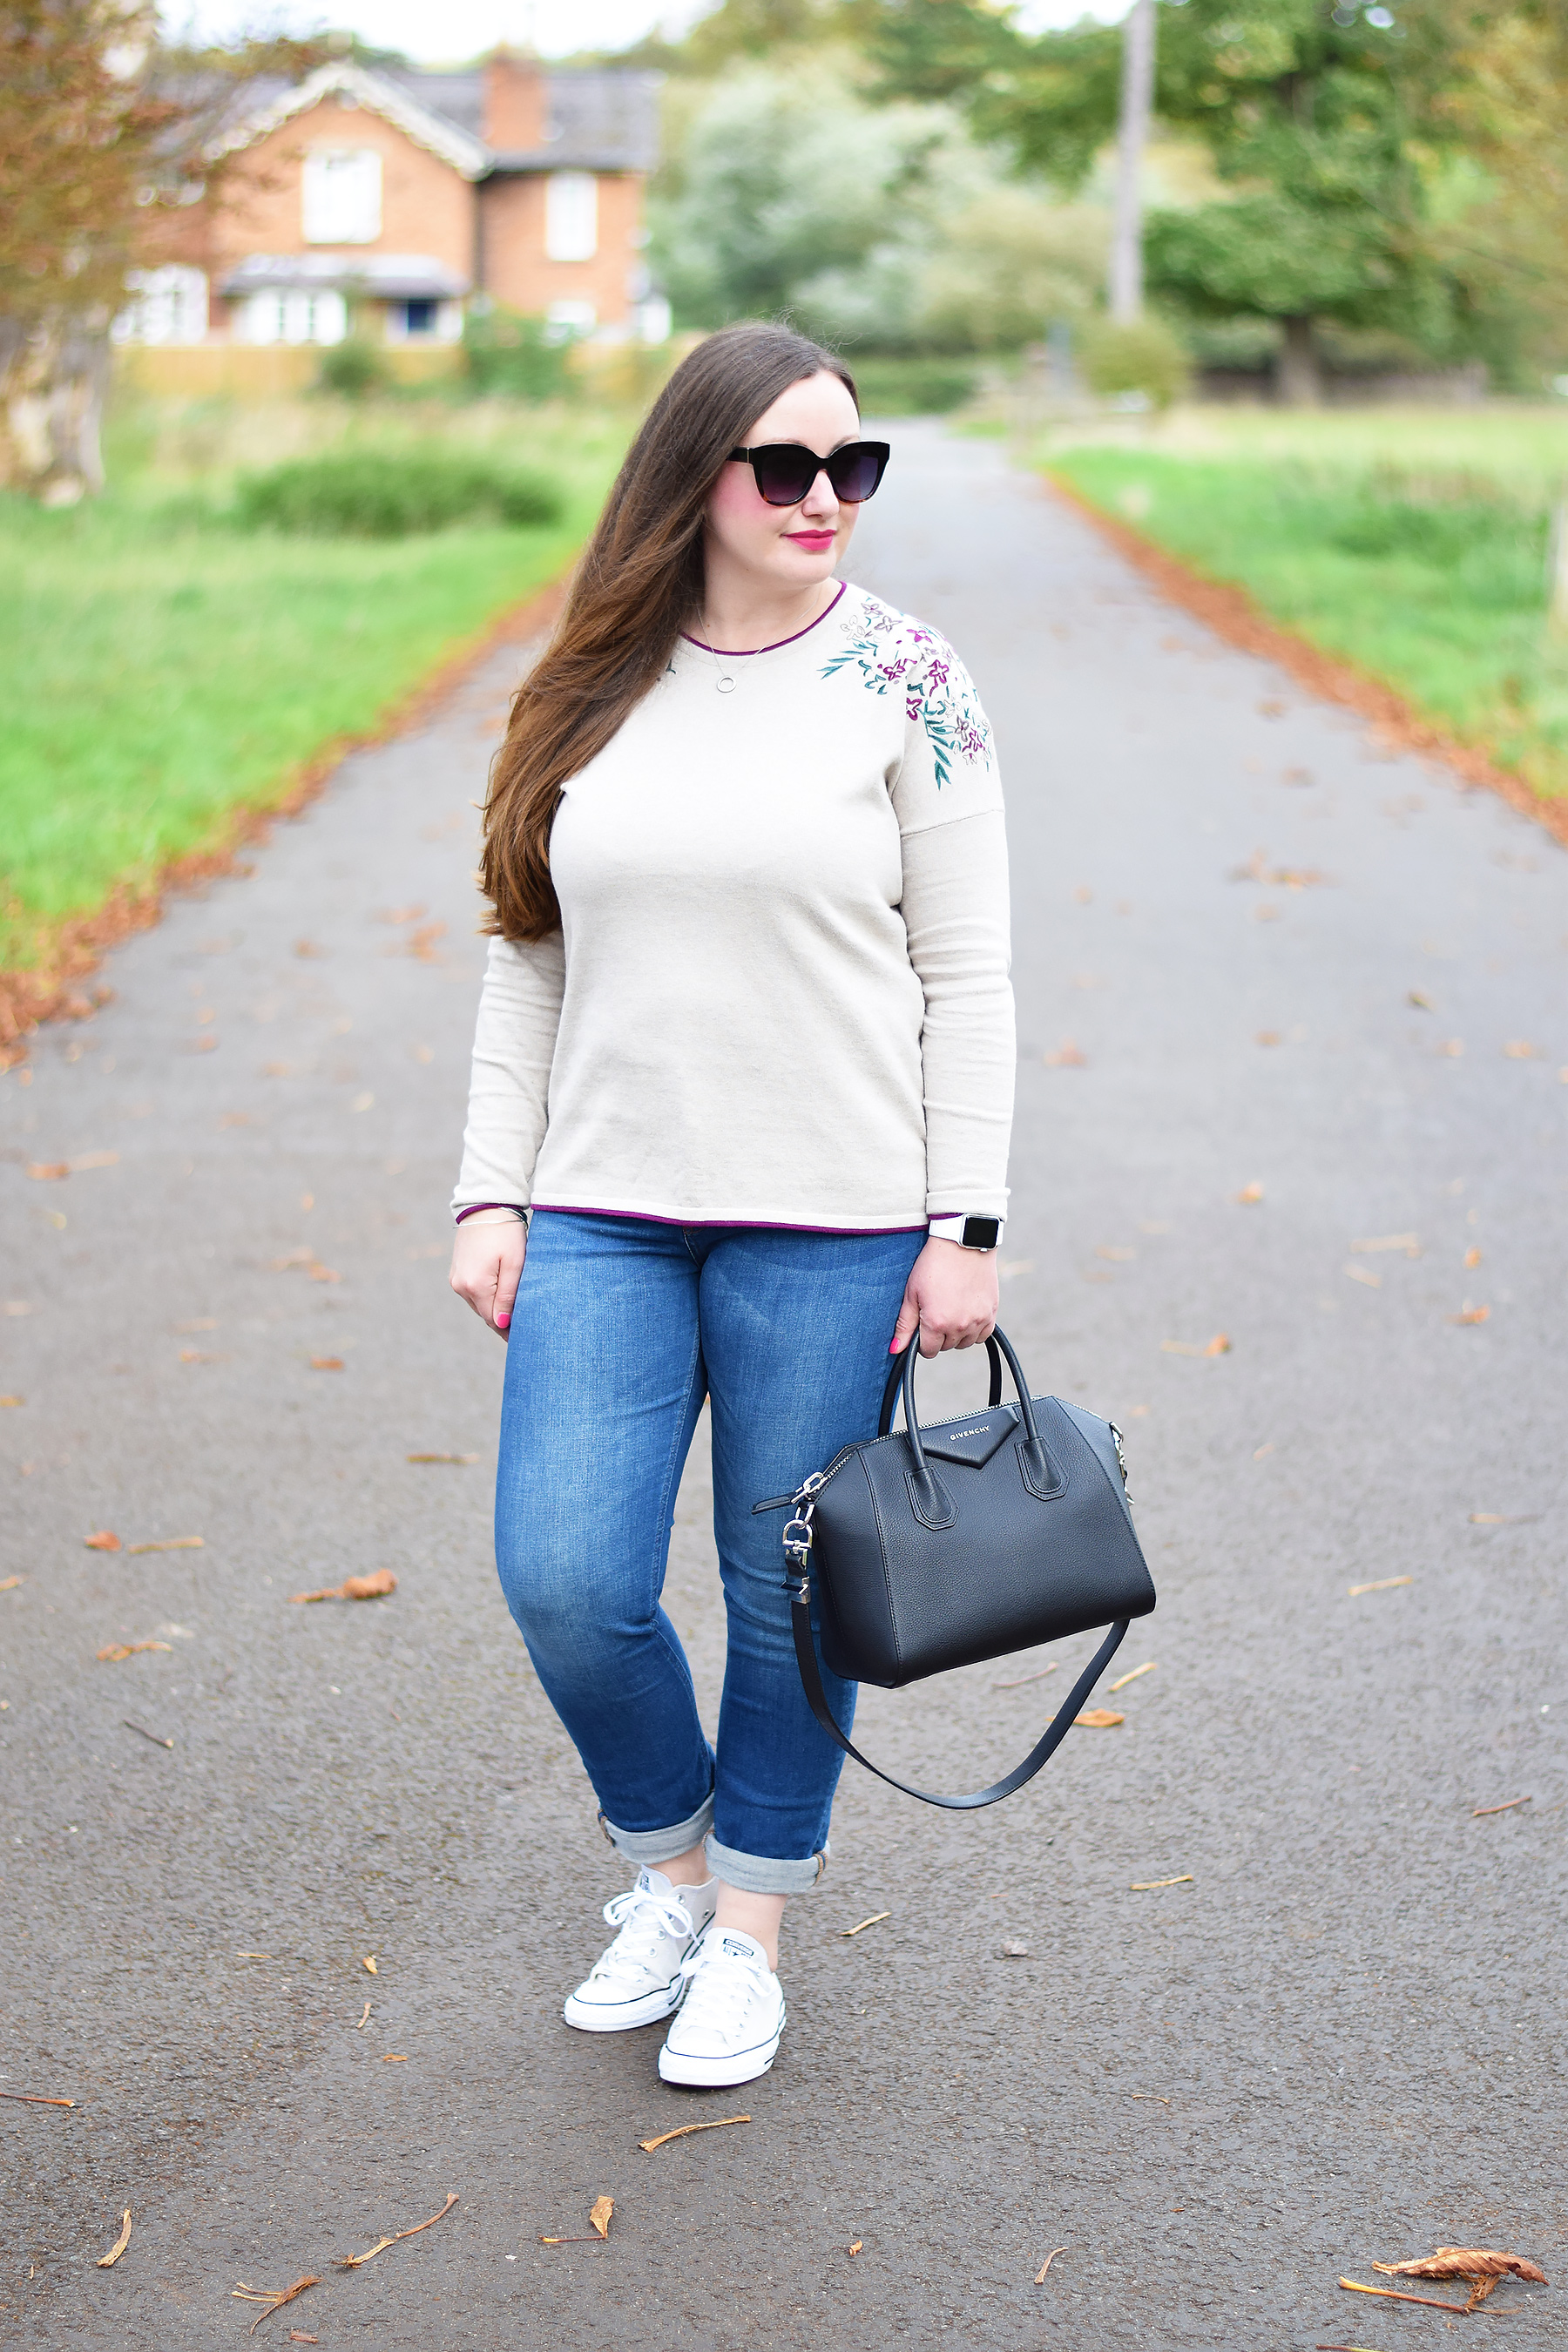 Embroidered jumper with jeans and trainers